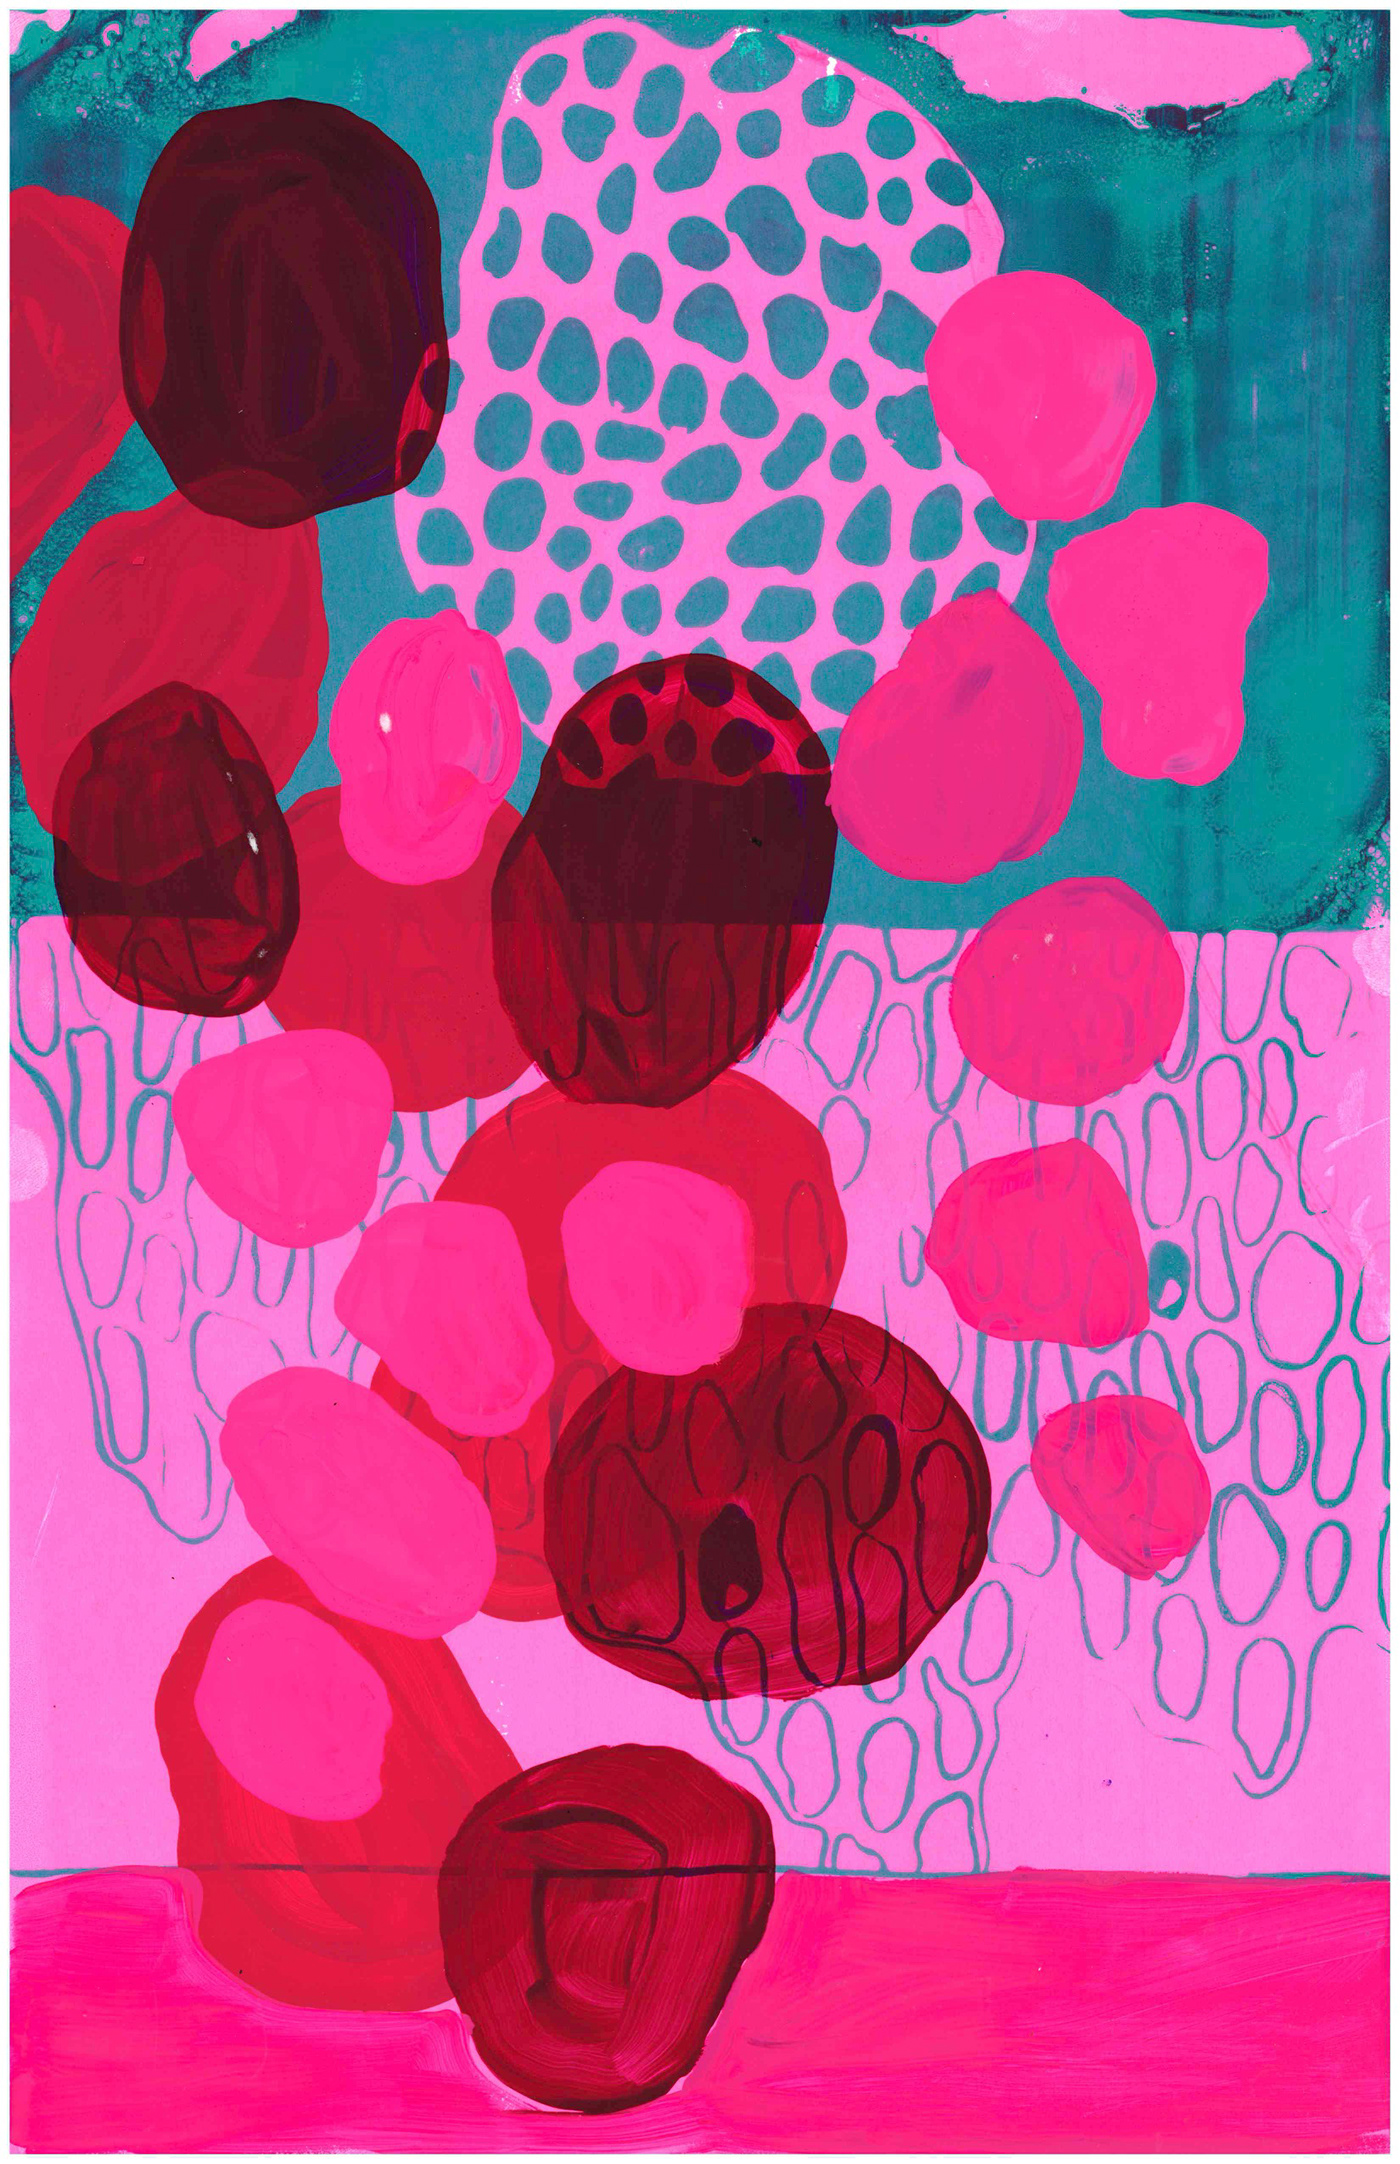 screen printing   color Screenprinting ink color systems holes abstraction painting   kathryn beavers